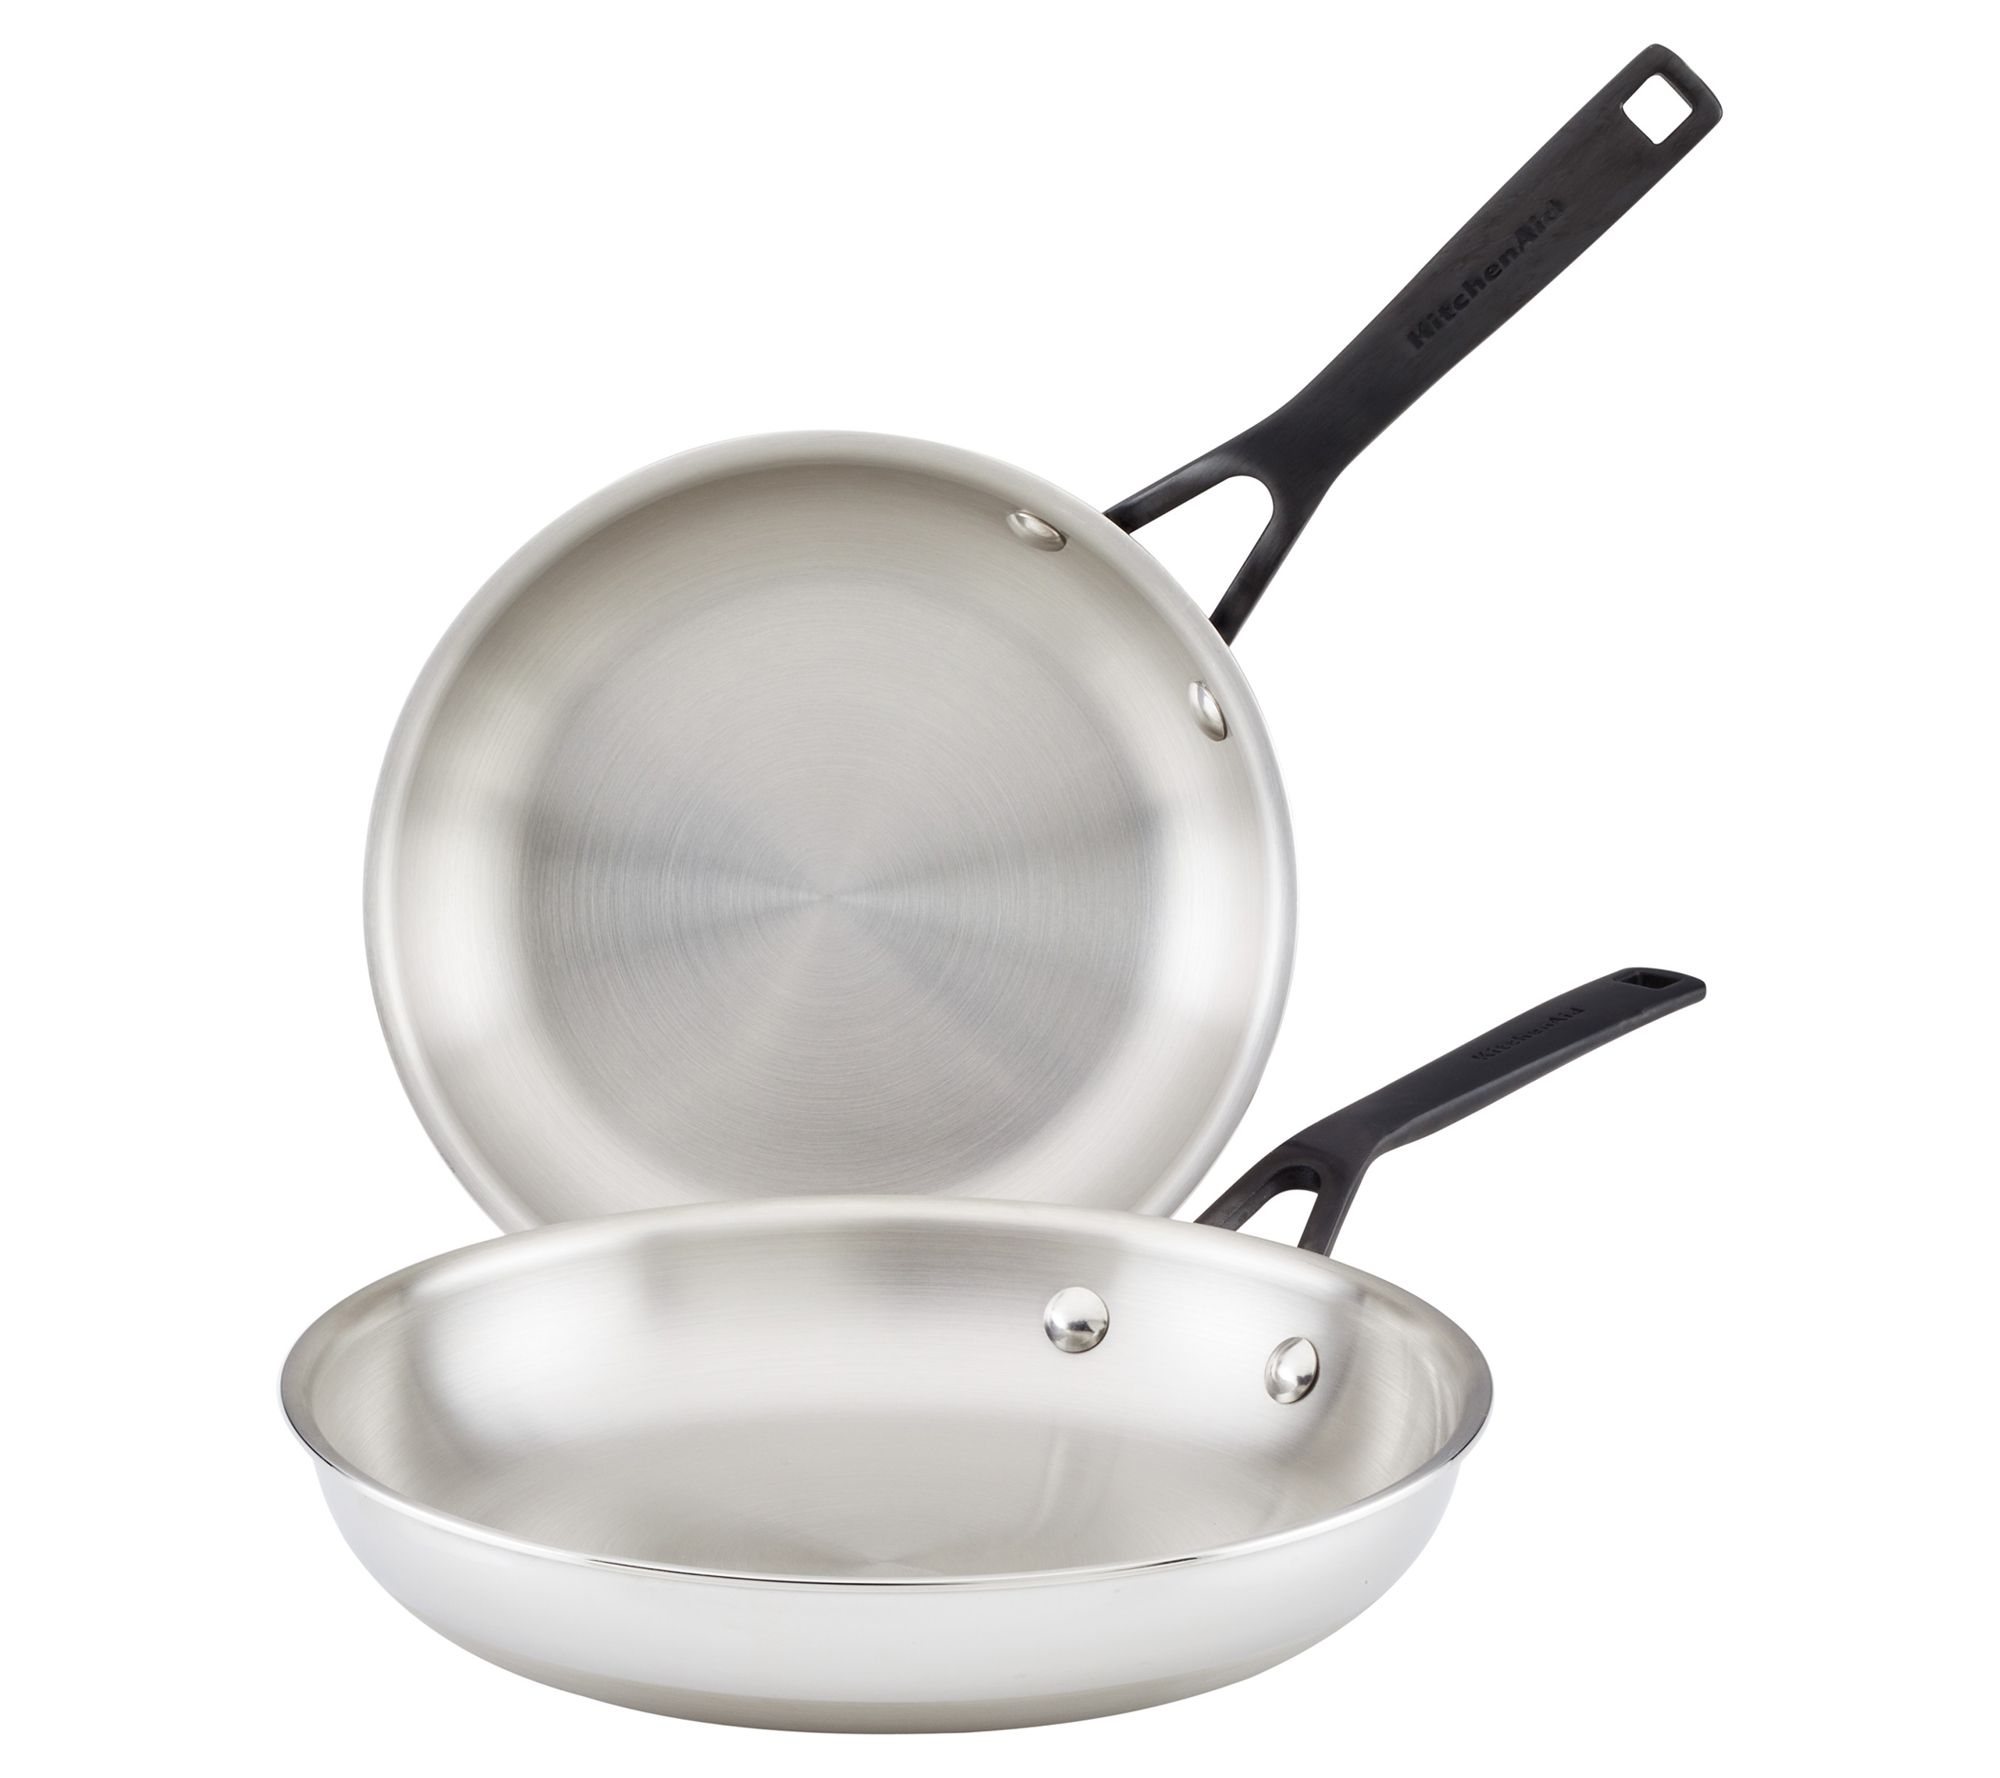 OXO Good Grips 10-Inch Frying Pan Skillet is 36% off